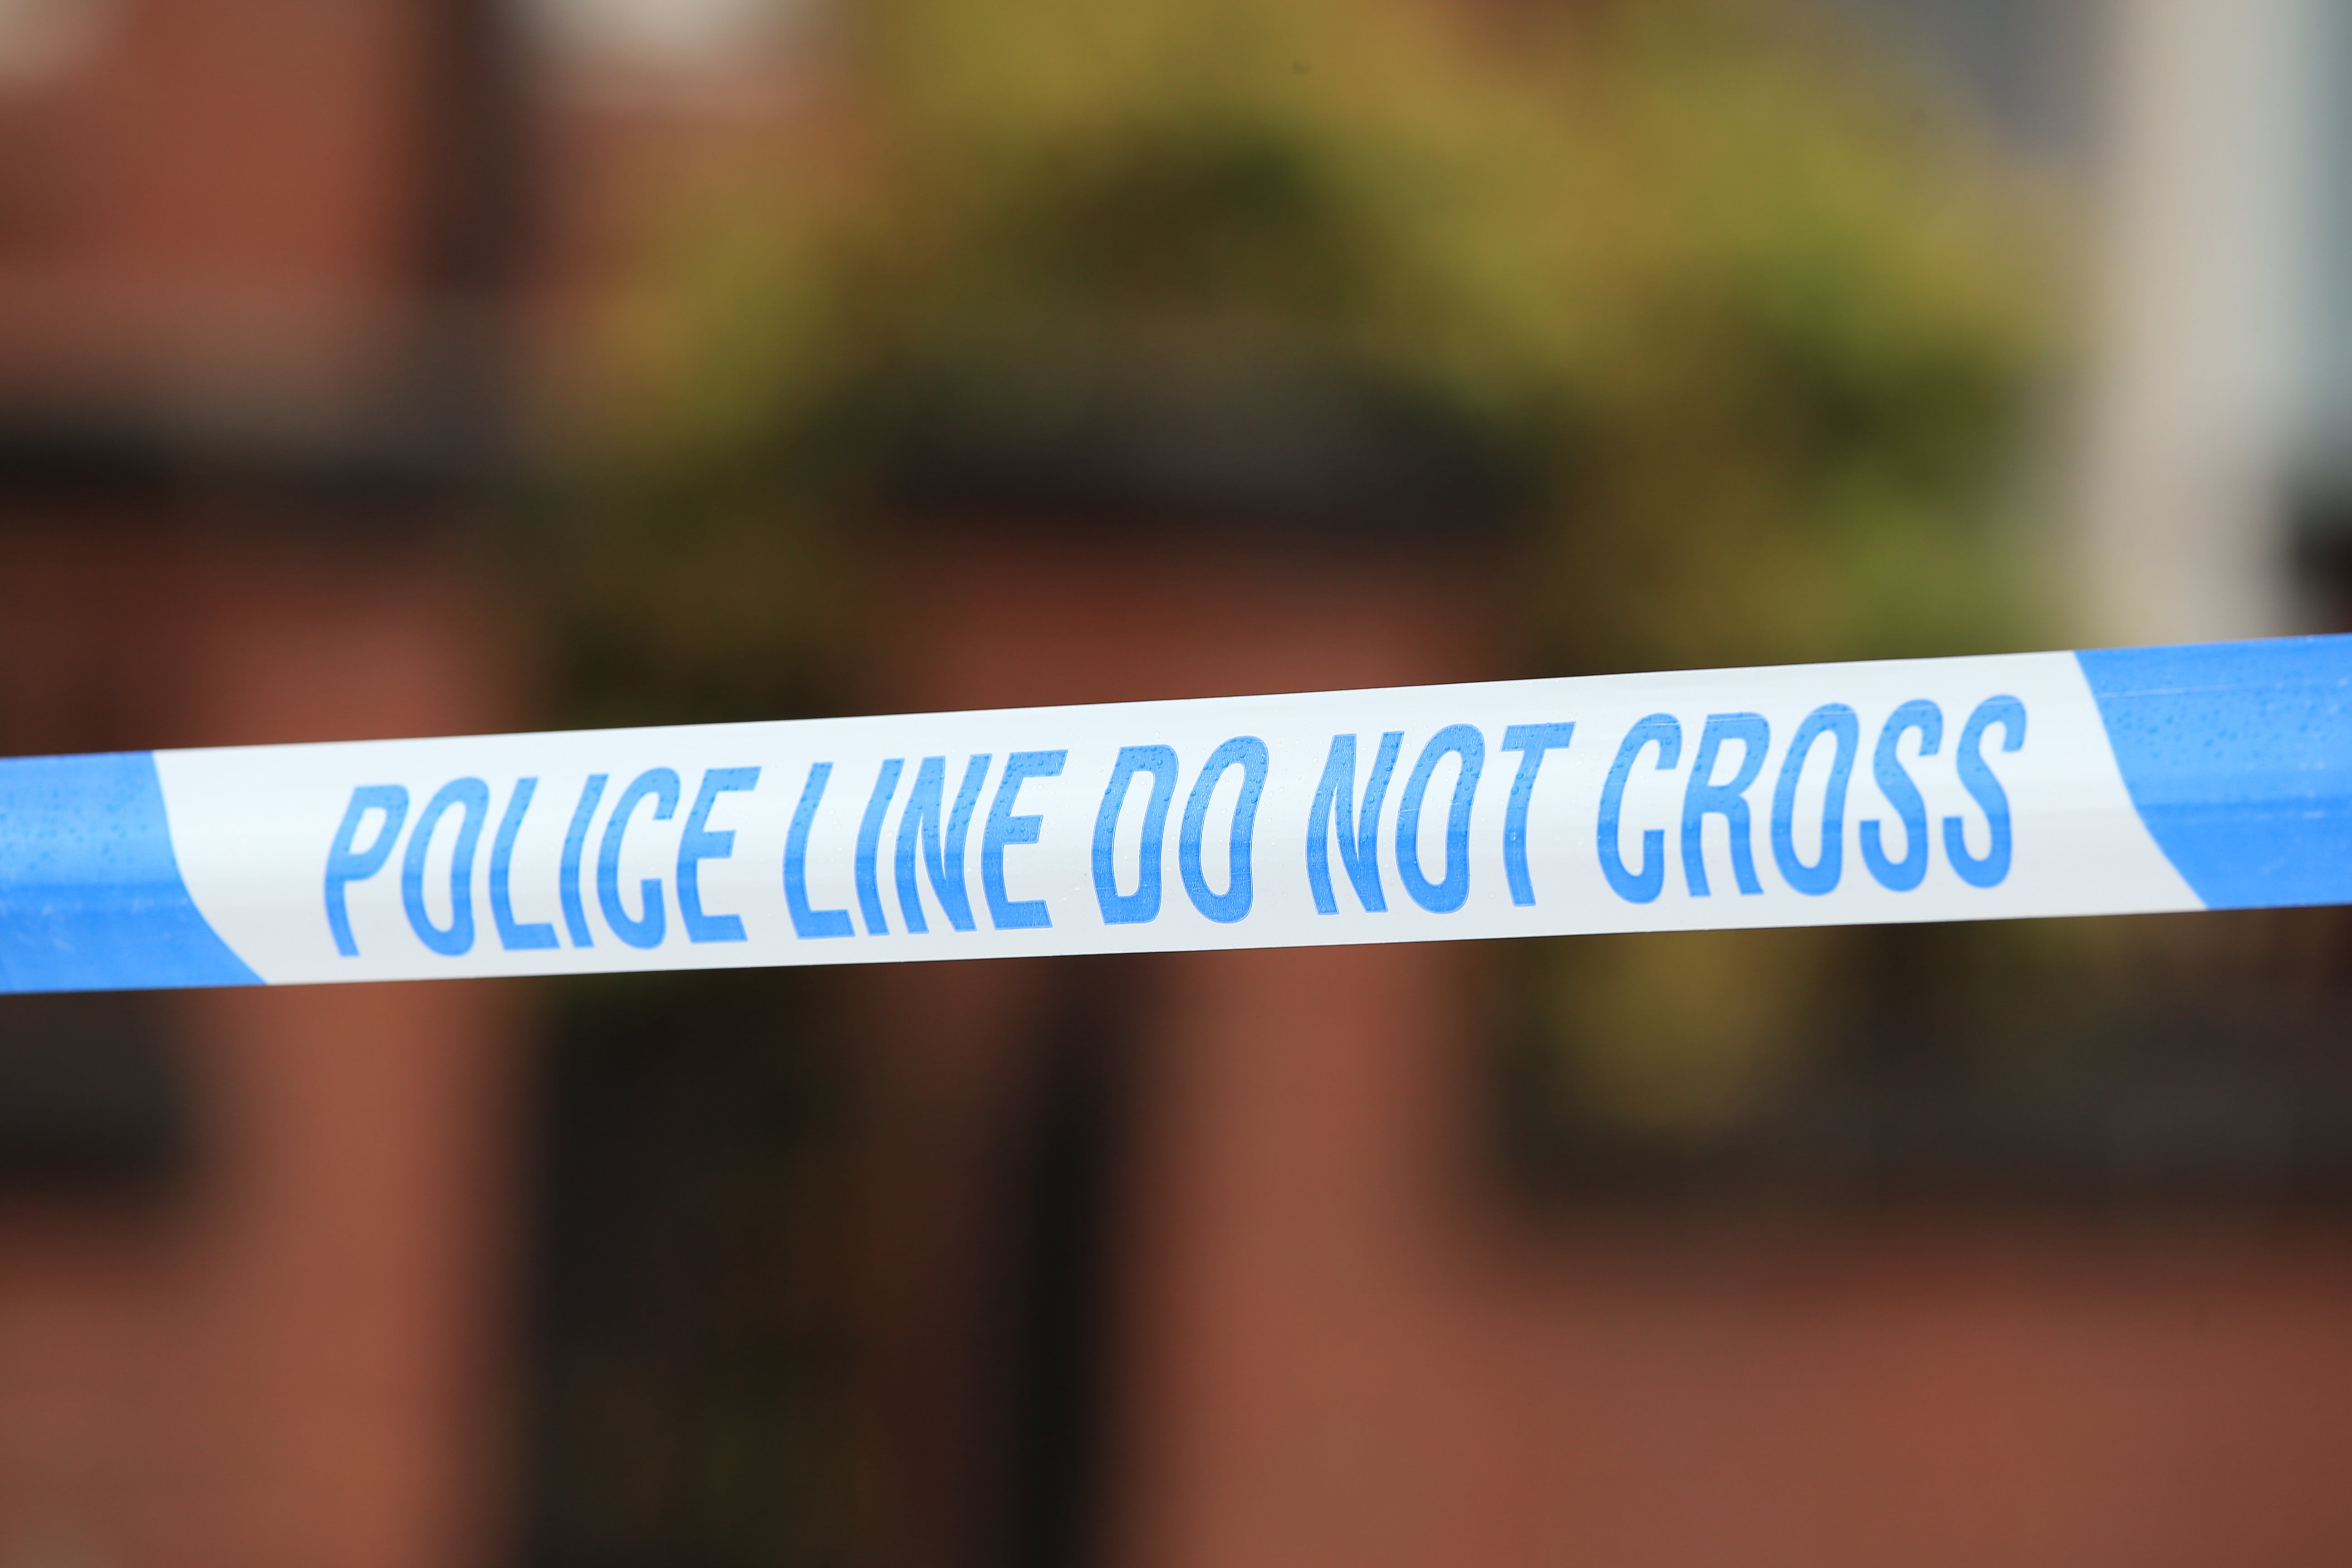 The murder inquiry was launched after an incident in Brooke Close on the evening of Thursday